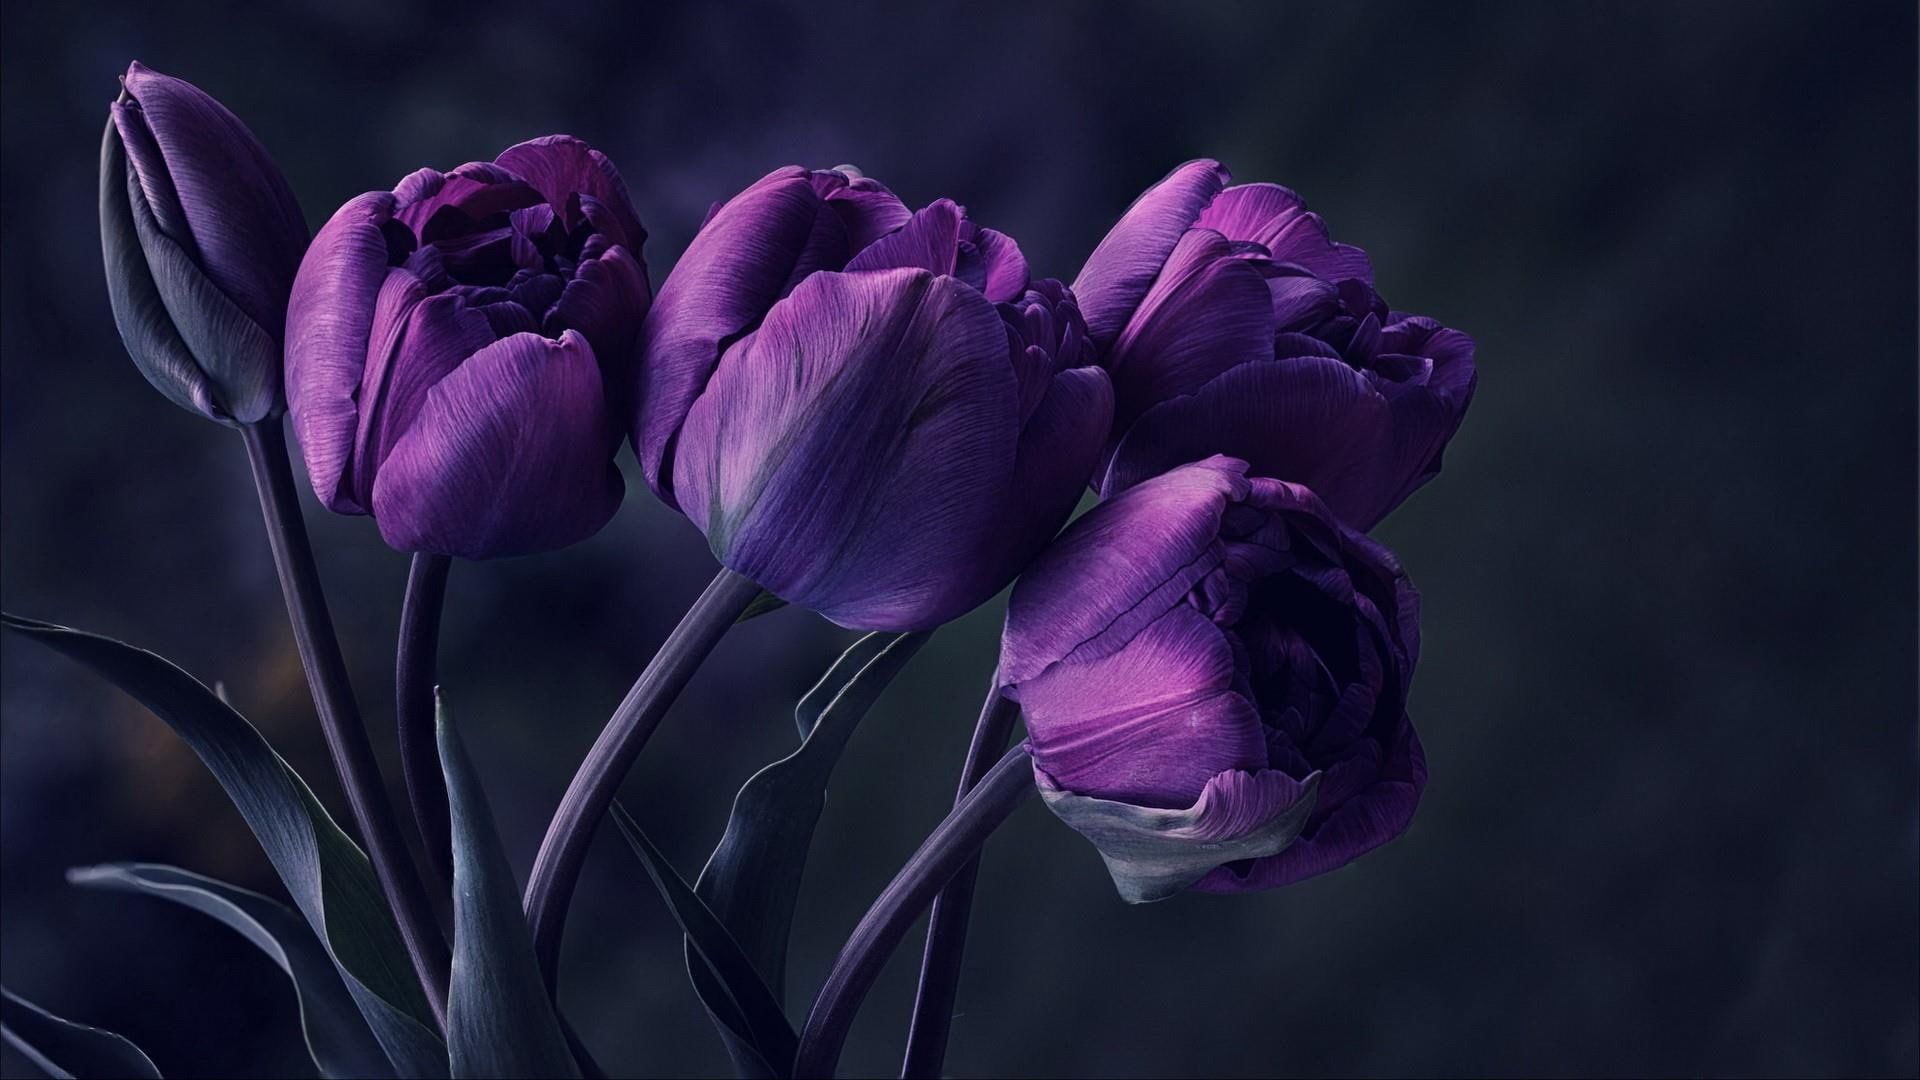 A close up of some purple flowers - Tulip